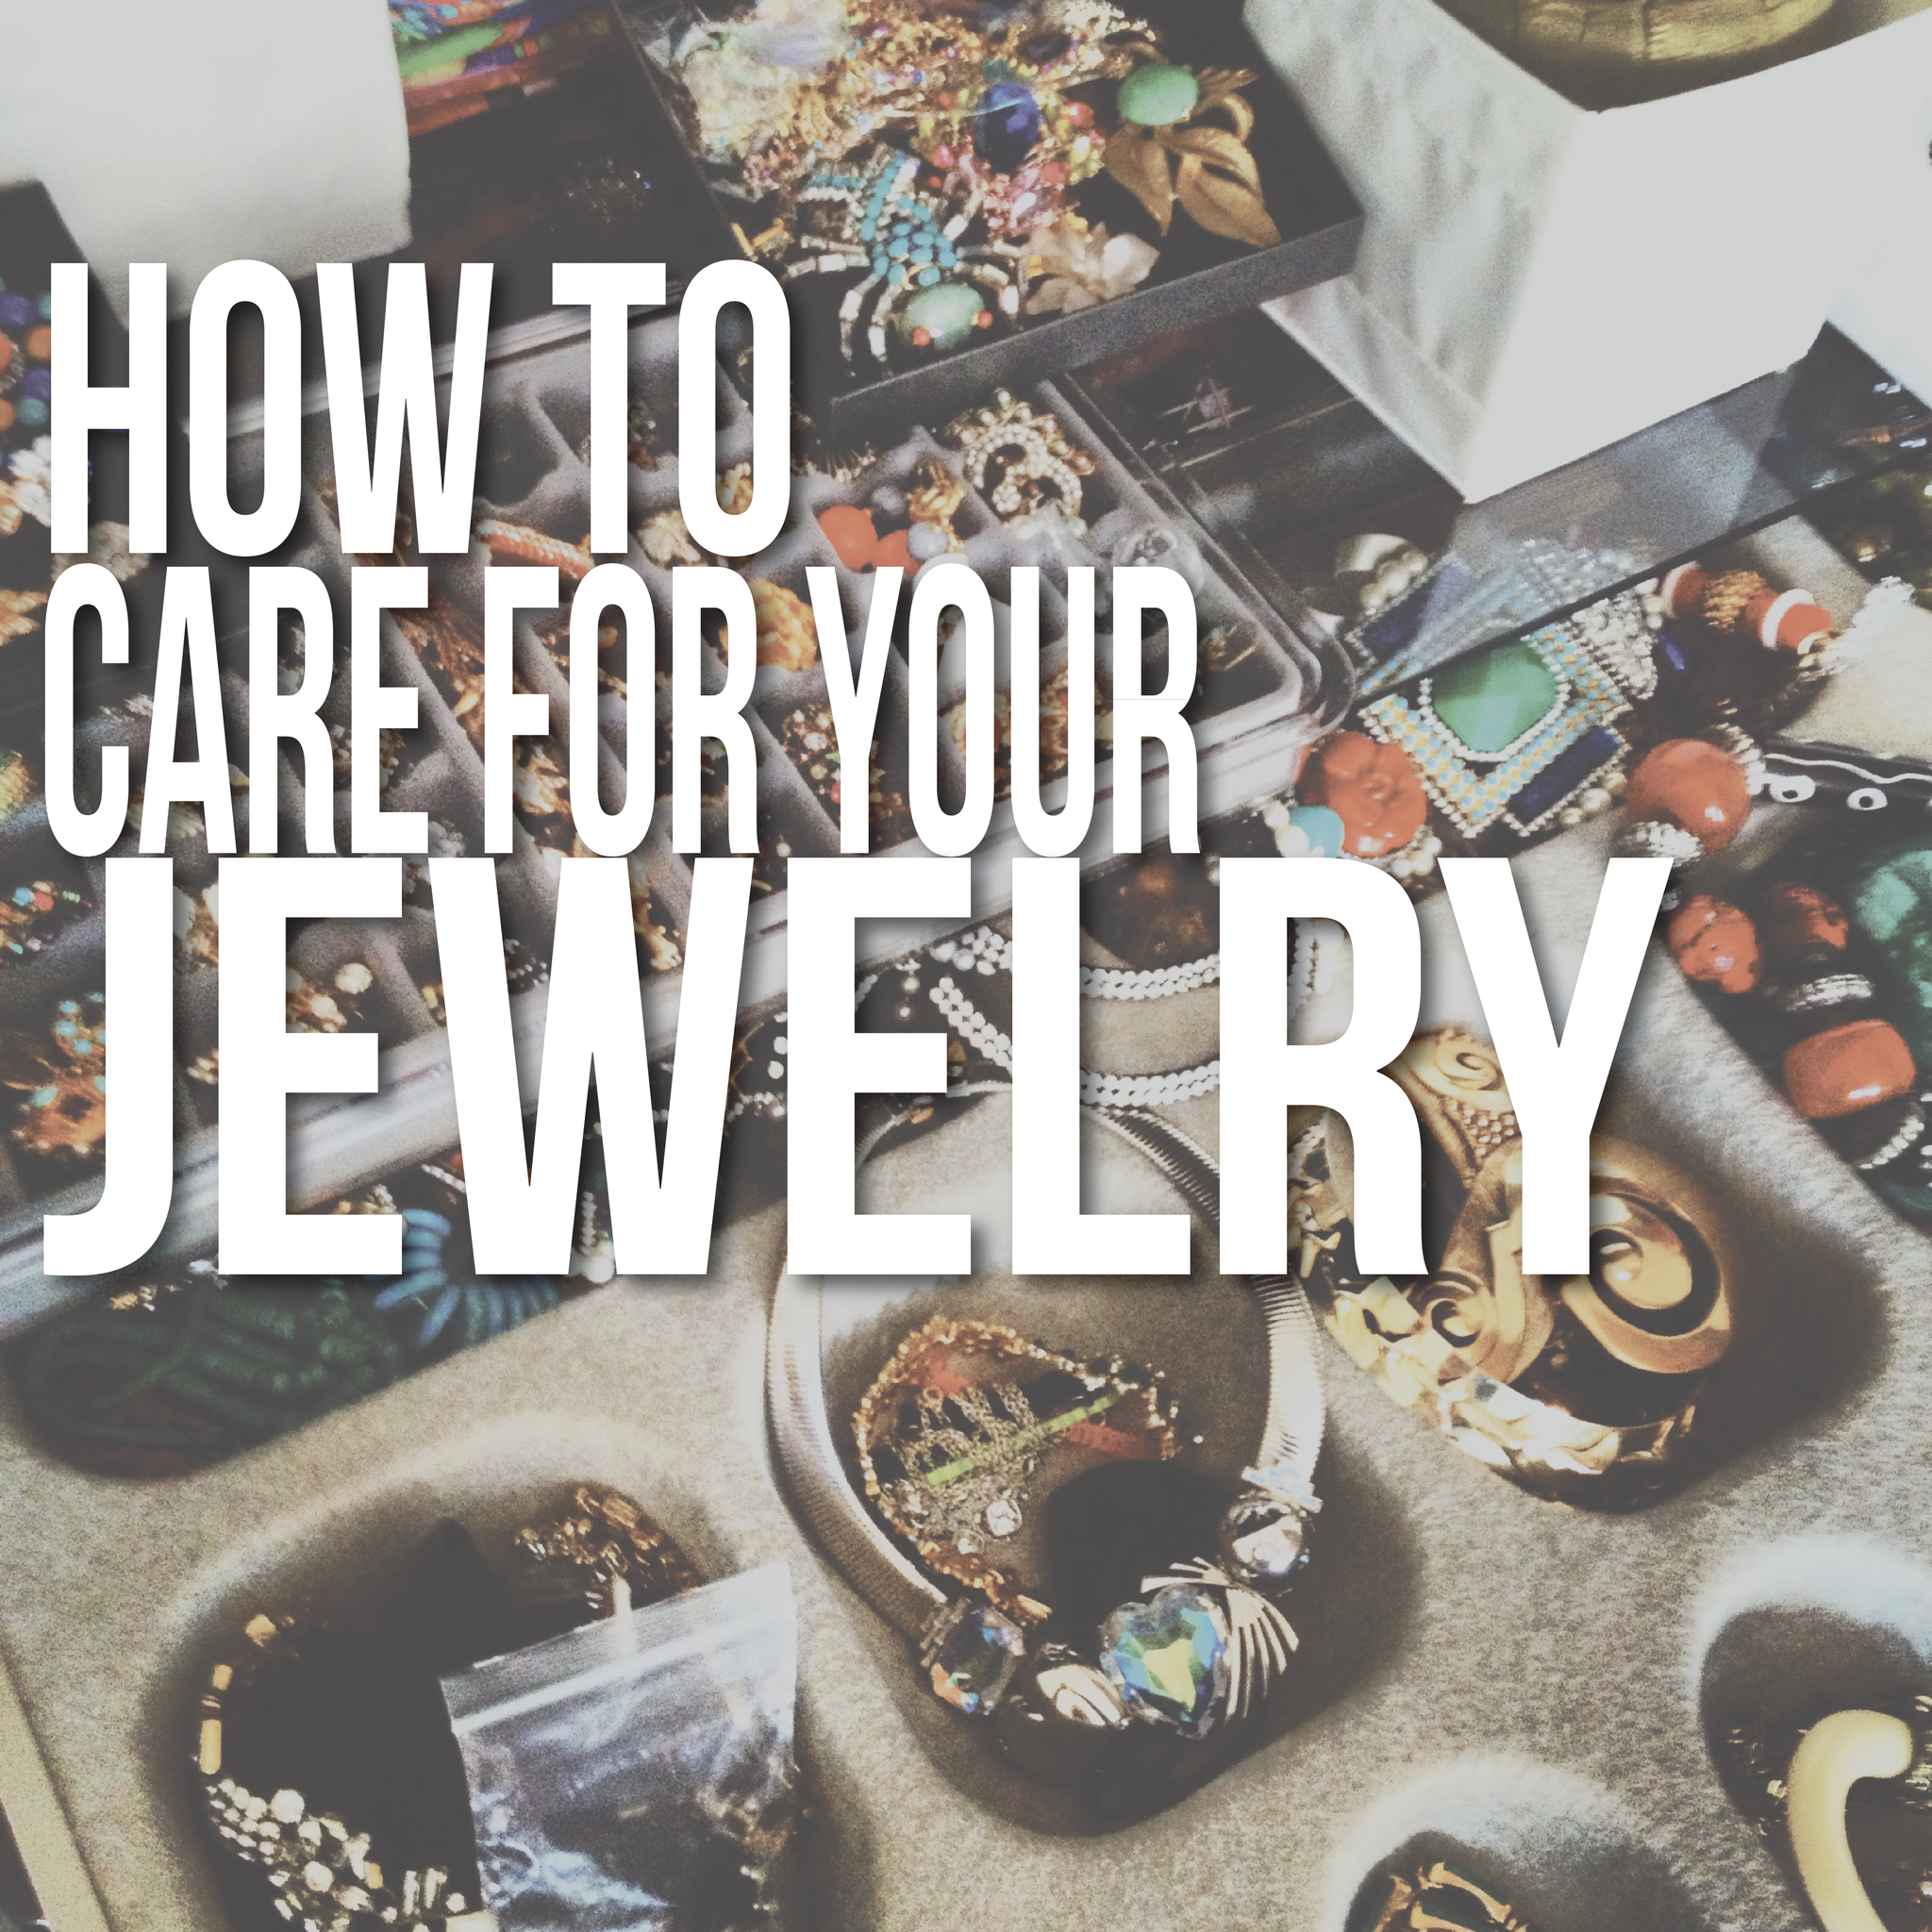 How to Care for Your Jewelry